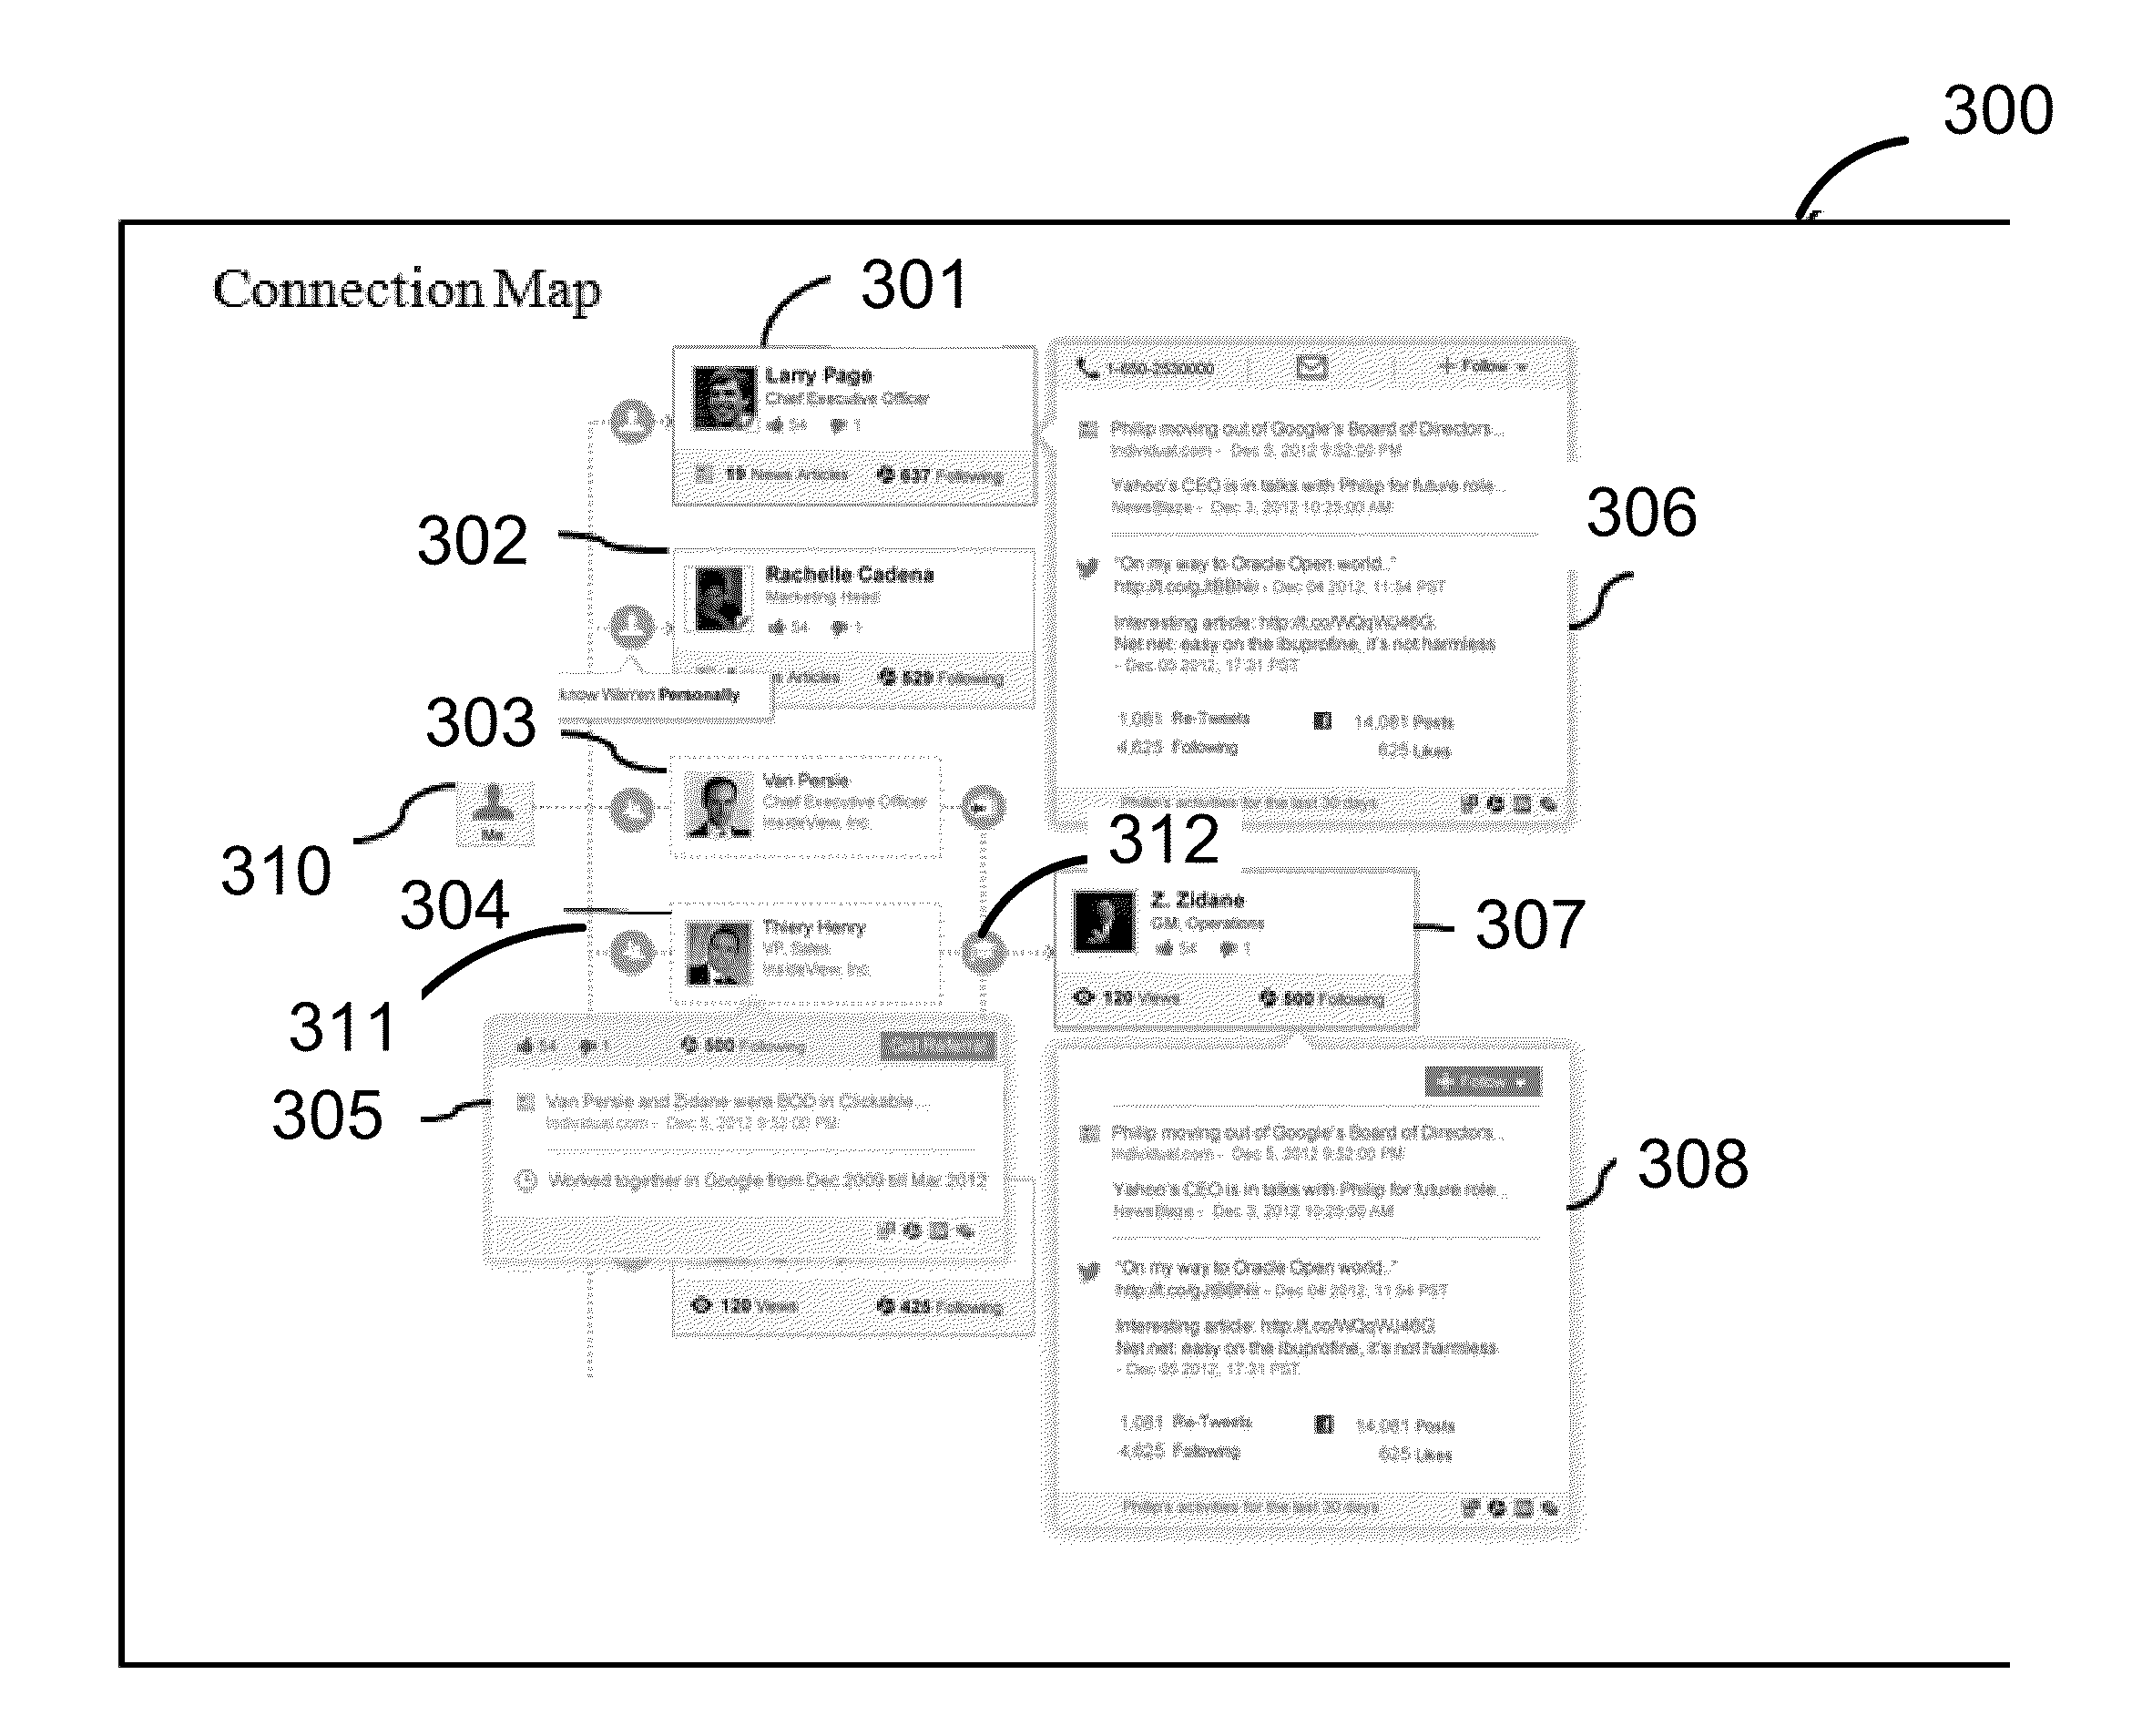 Generating Connection Map for Intelligent Connections in Enterprises